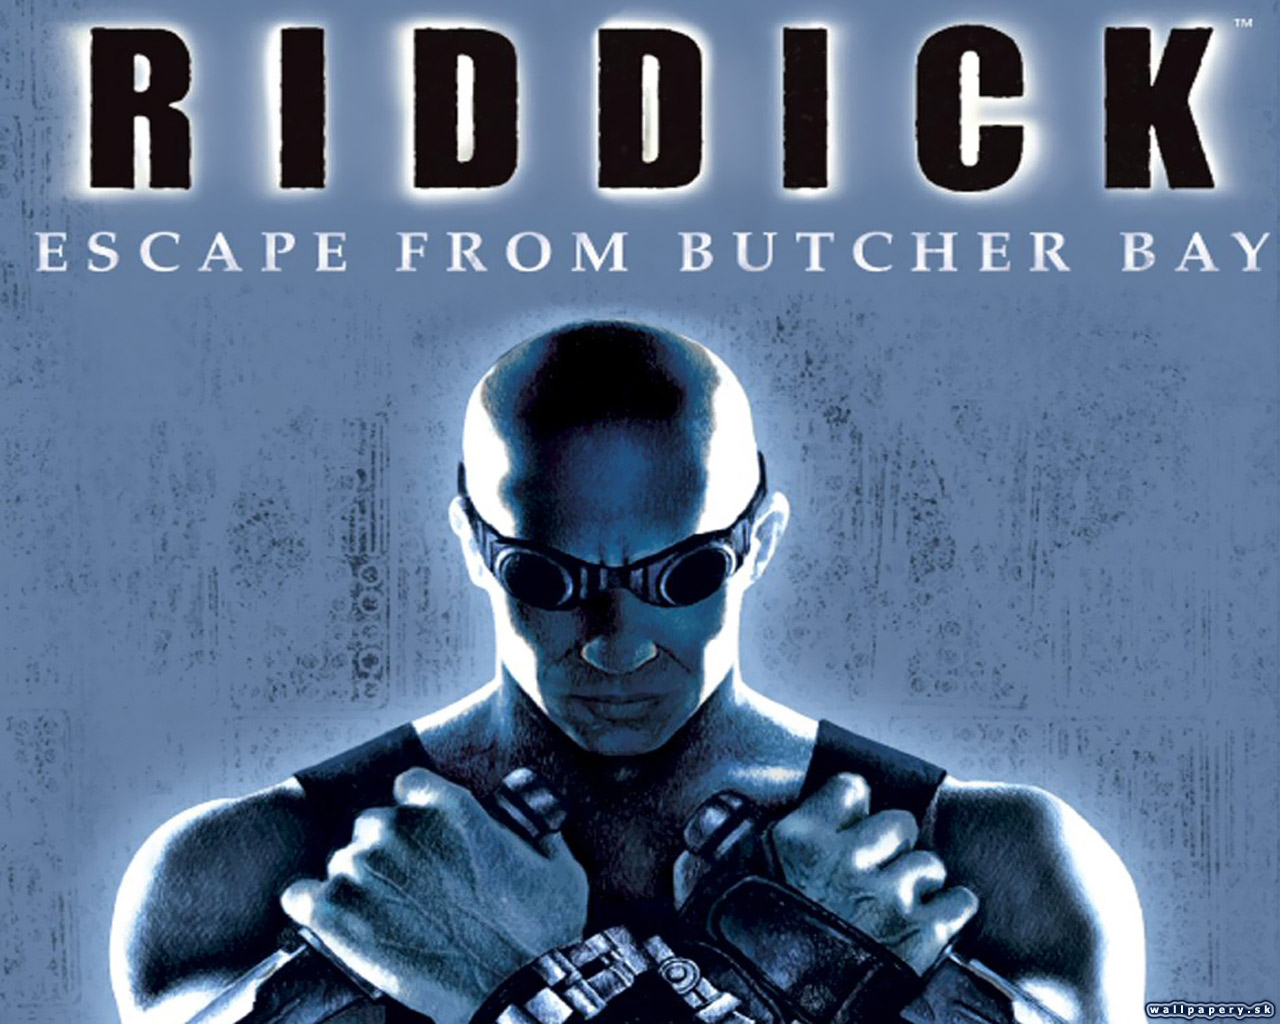 The Chronicles of Riddick: Escape From Butcher Bay - wallpaper 7